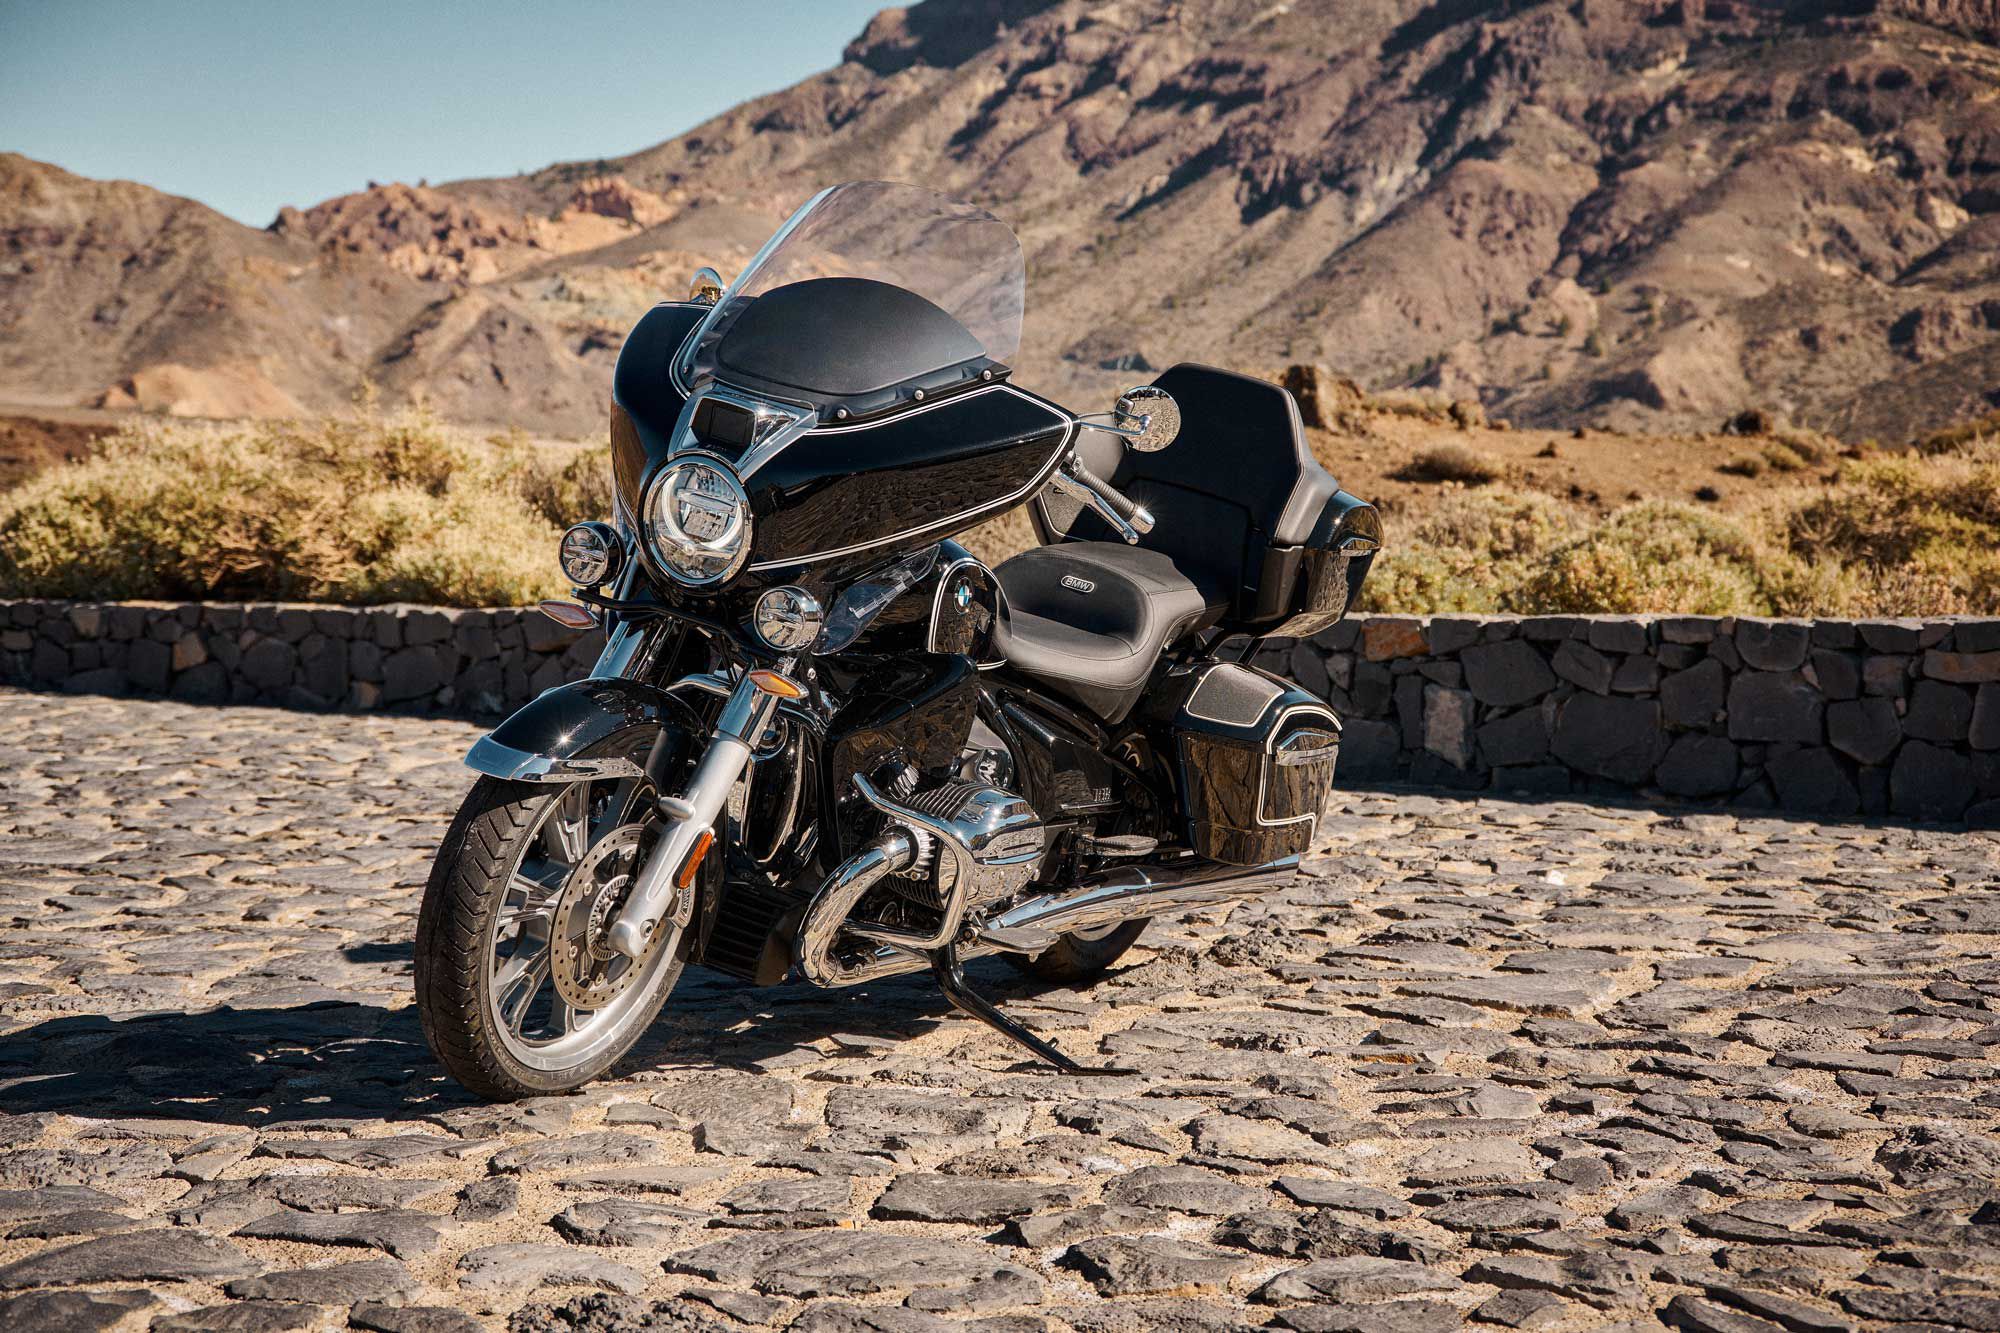 The BMW R 18 B Transcontinental is built to eat up miles.